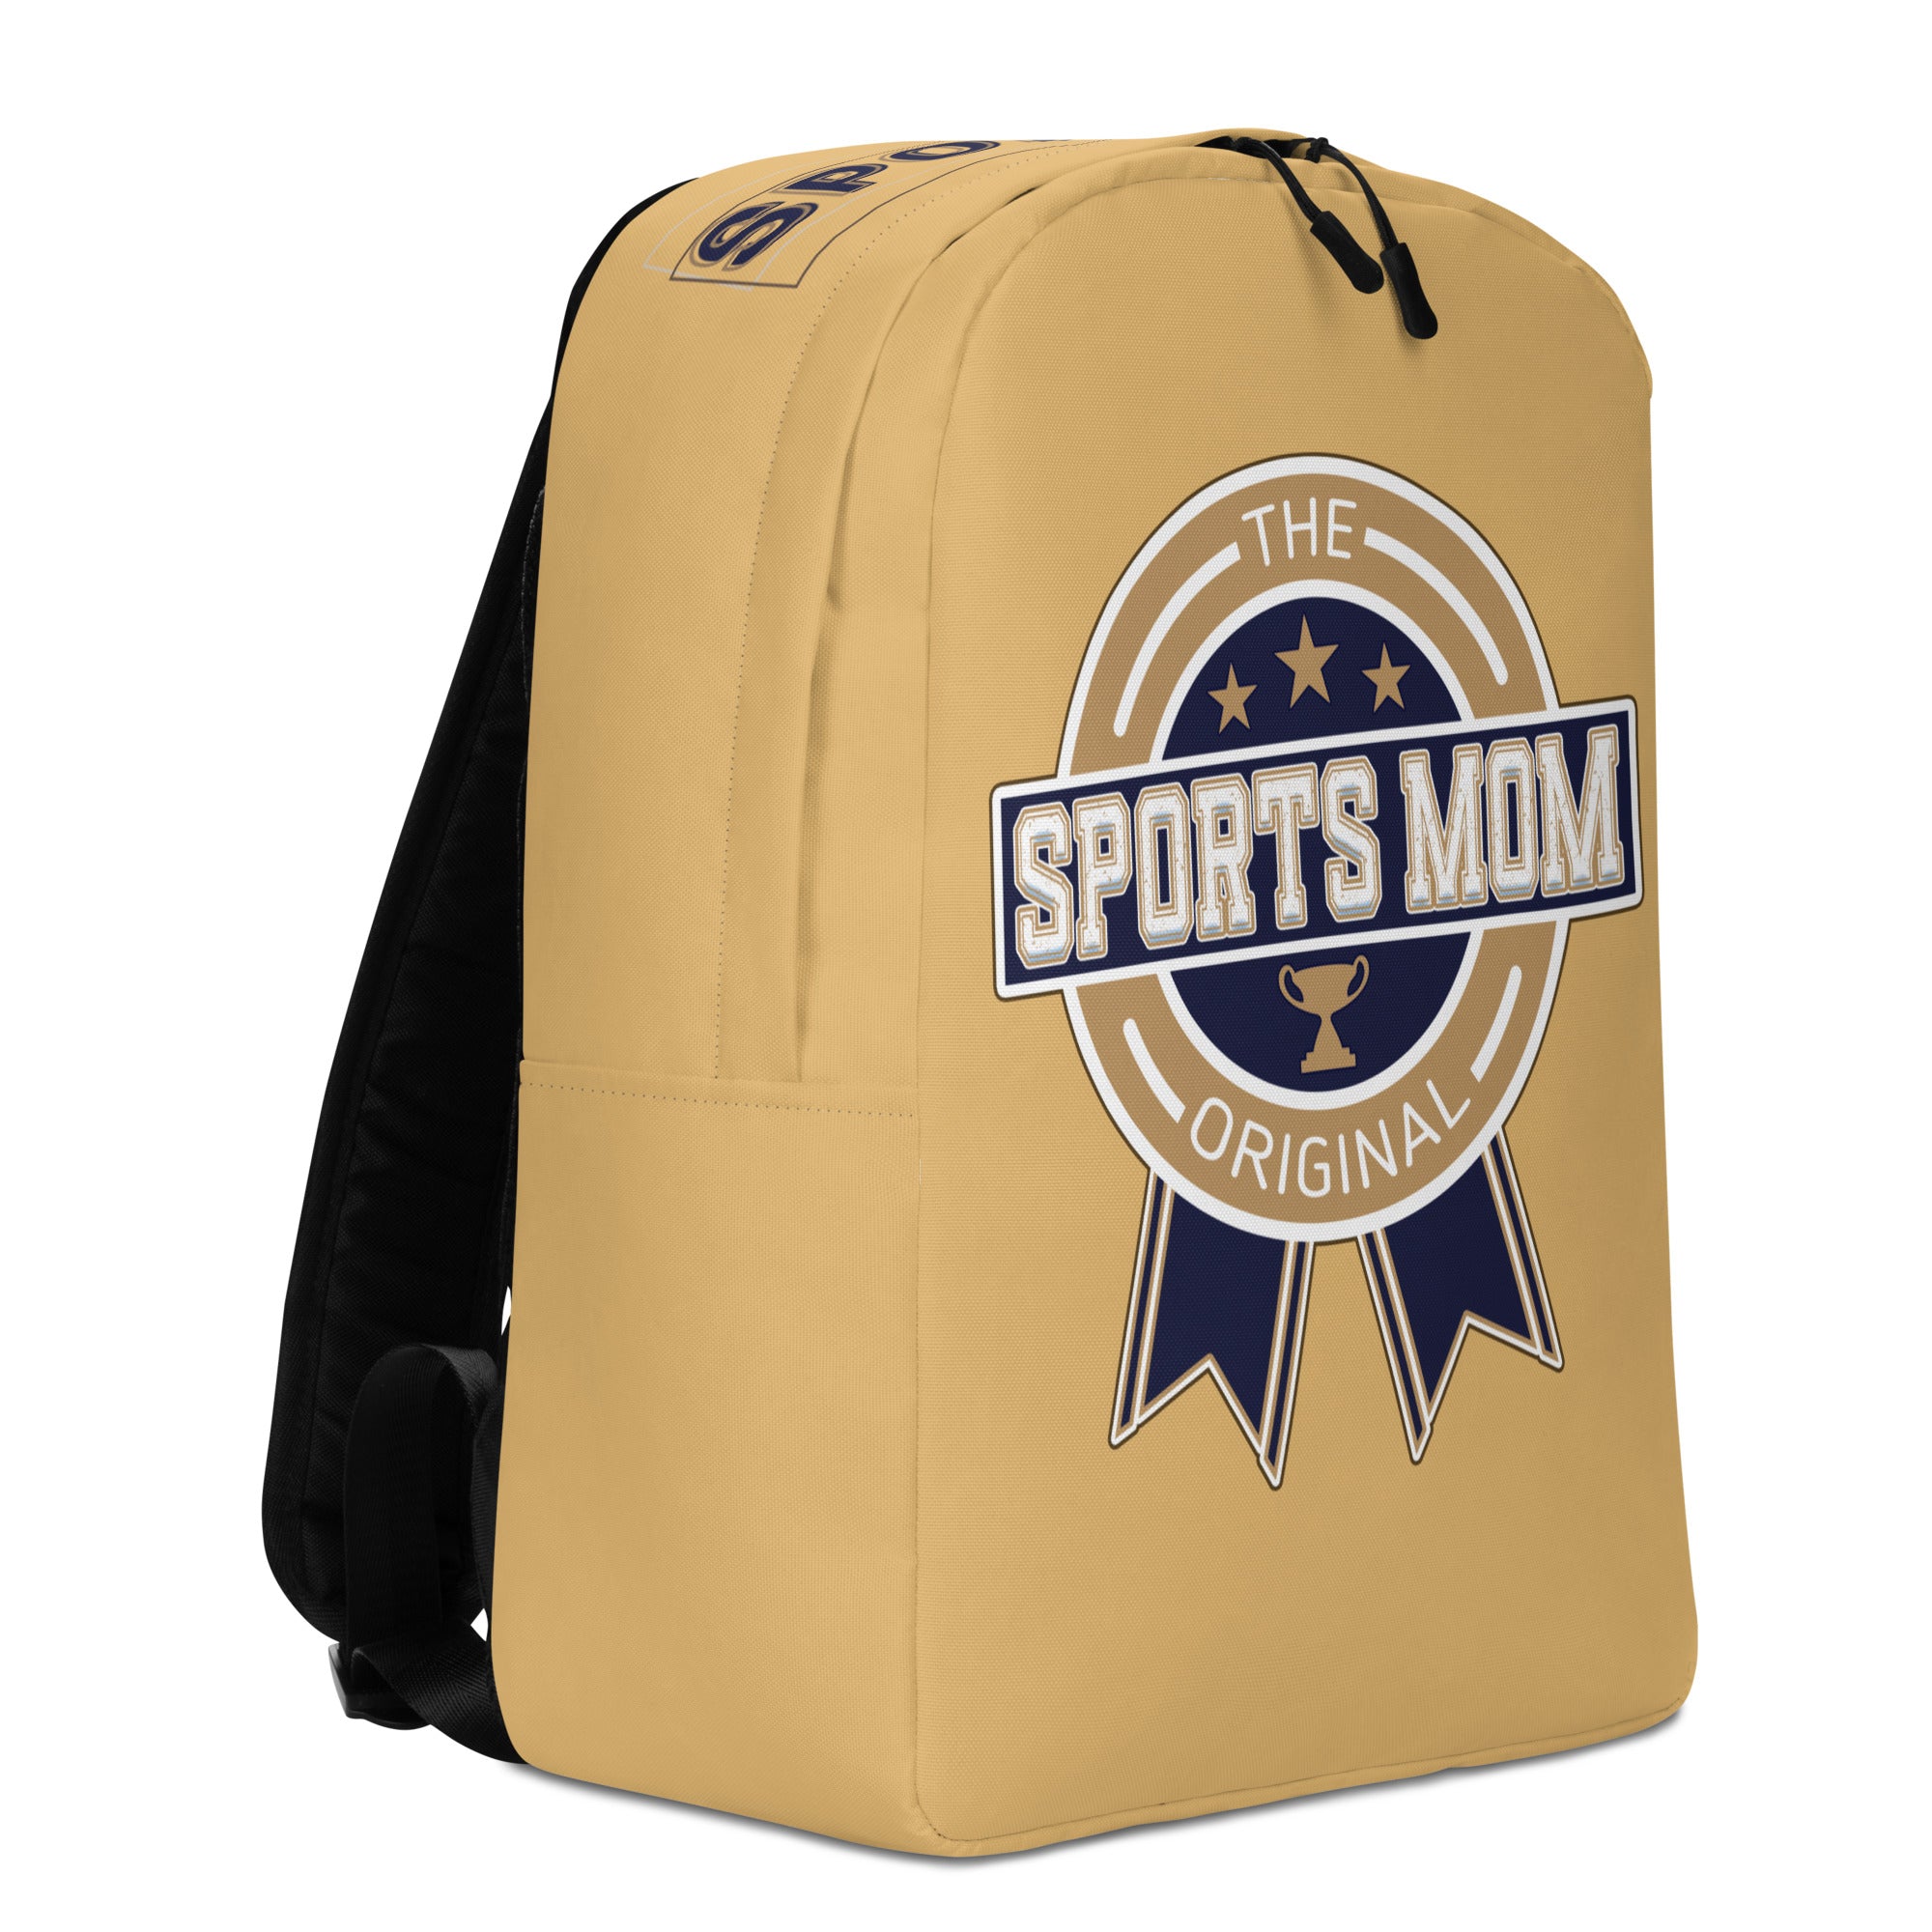 Sports Mom Minimalist Backpack - Away Game - Fawn